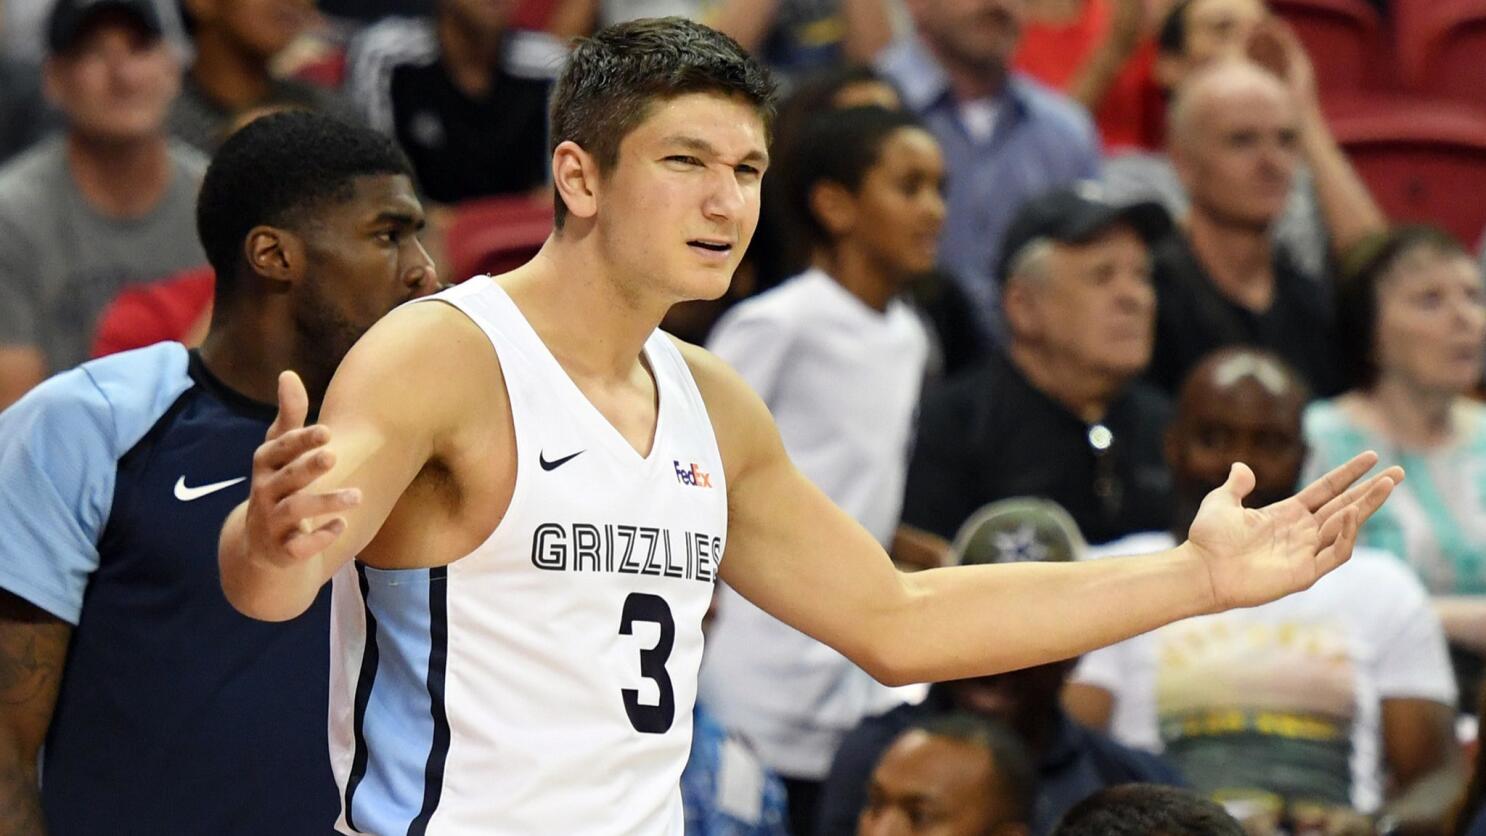 Grayson Allen says he's ready for the NBA, and the Celtics are taking a look